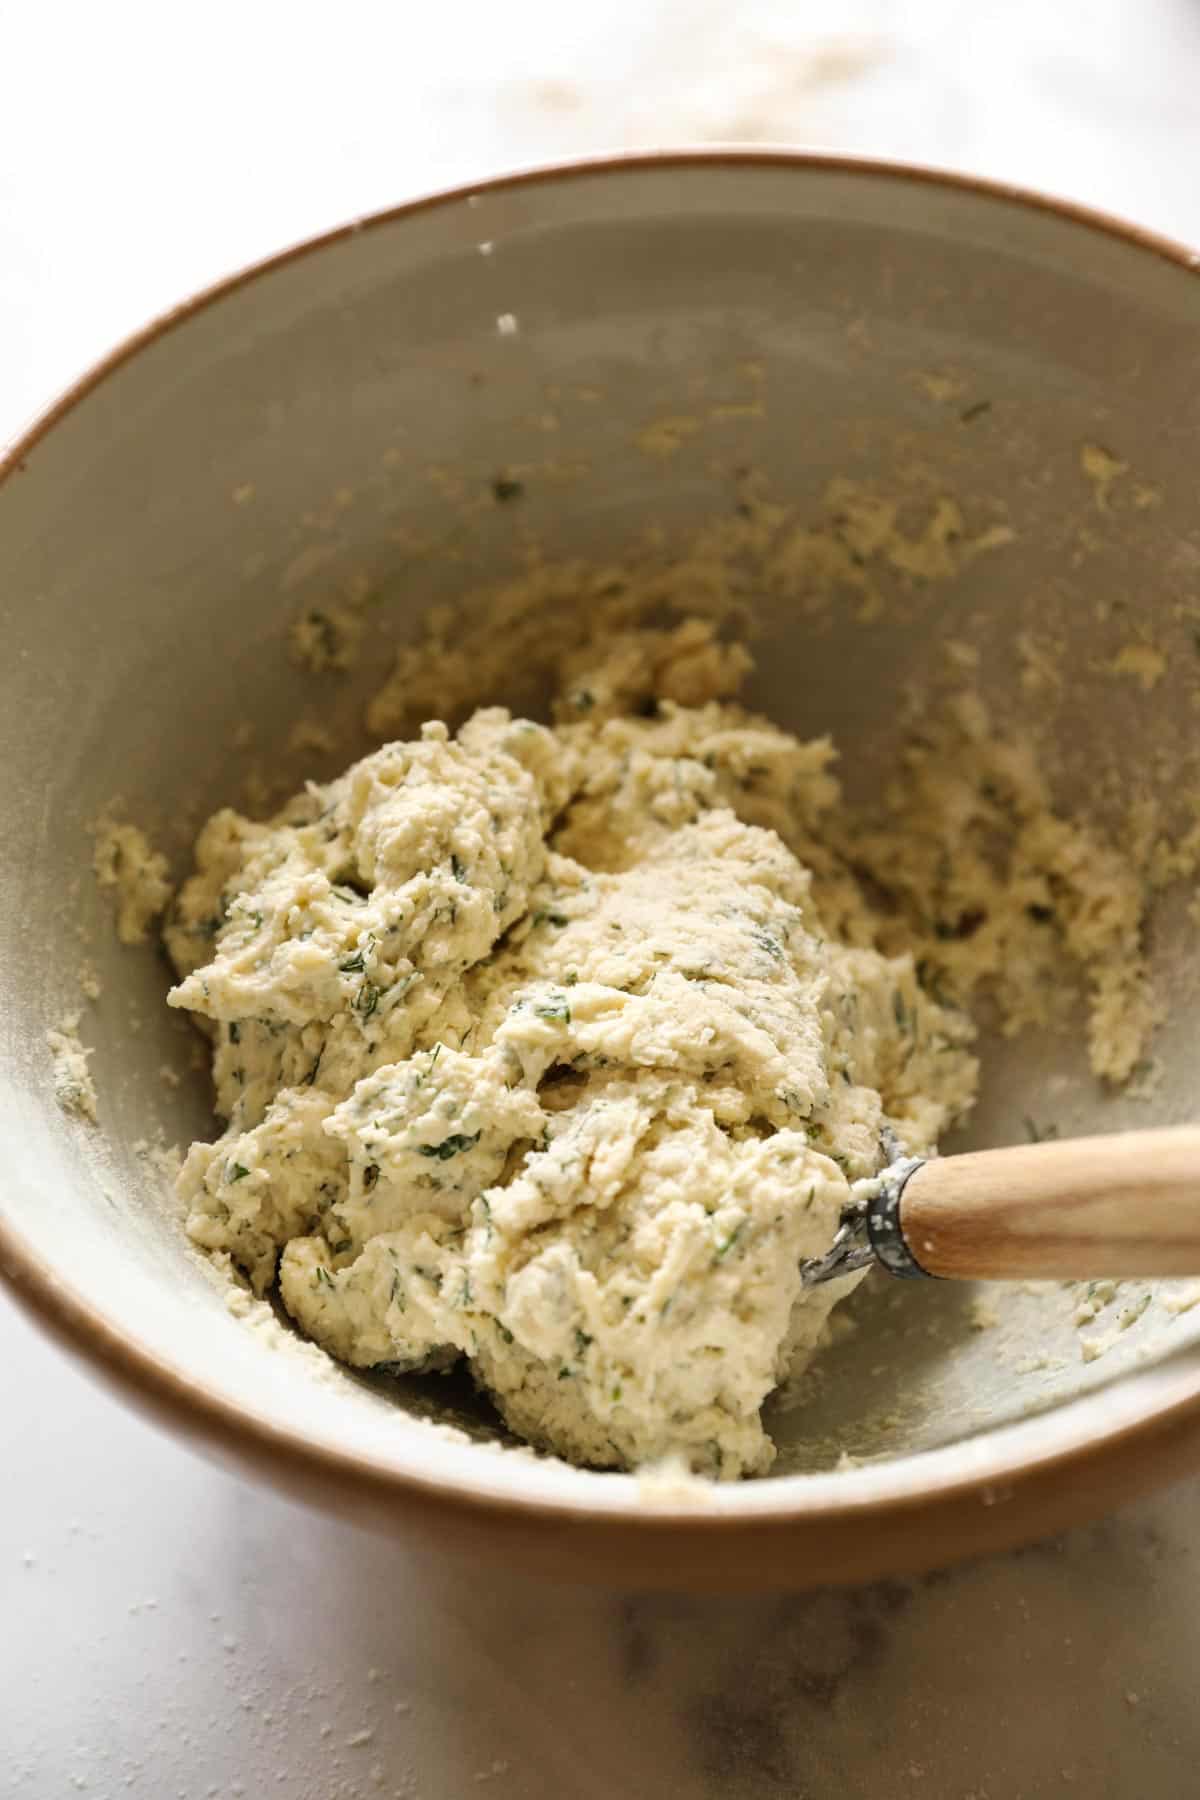 Biscuit dough with herbs in a mixing bowl